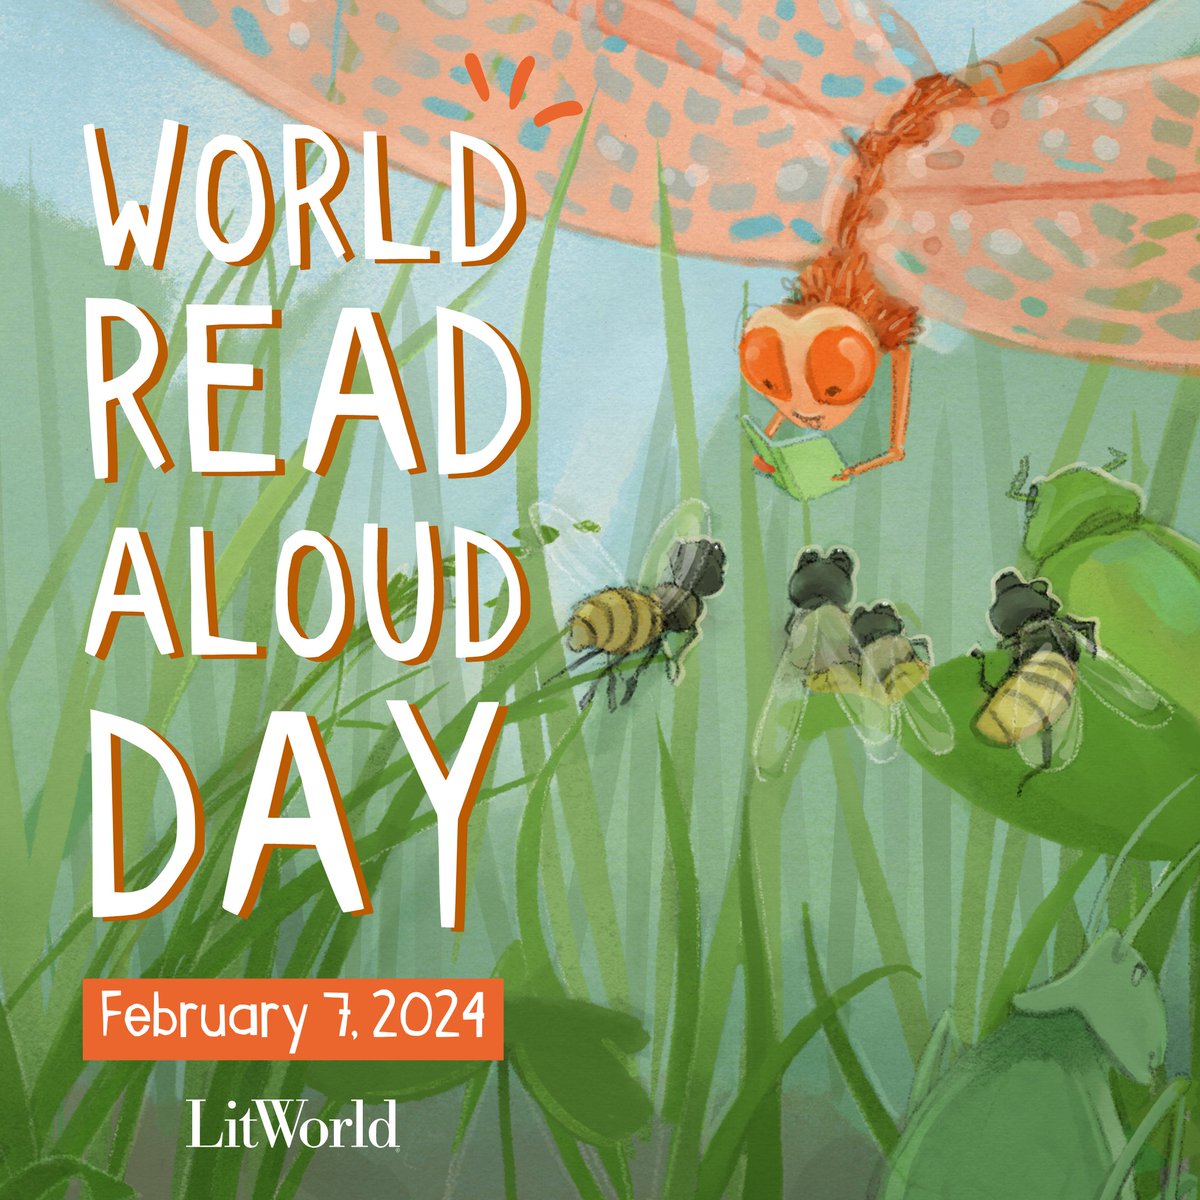 The big day is finally here! Today is the 15th annual #WorldReadAloudDay, and millions of people from around the globe are joining together to celebrate the power and joy of reading aloud. 🎉 Head over to our #WRAD Activity Hub for more: litworld.org/wrad